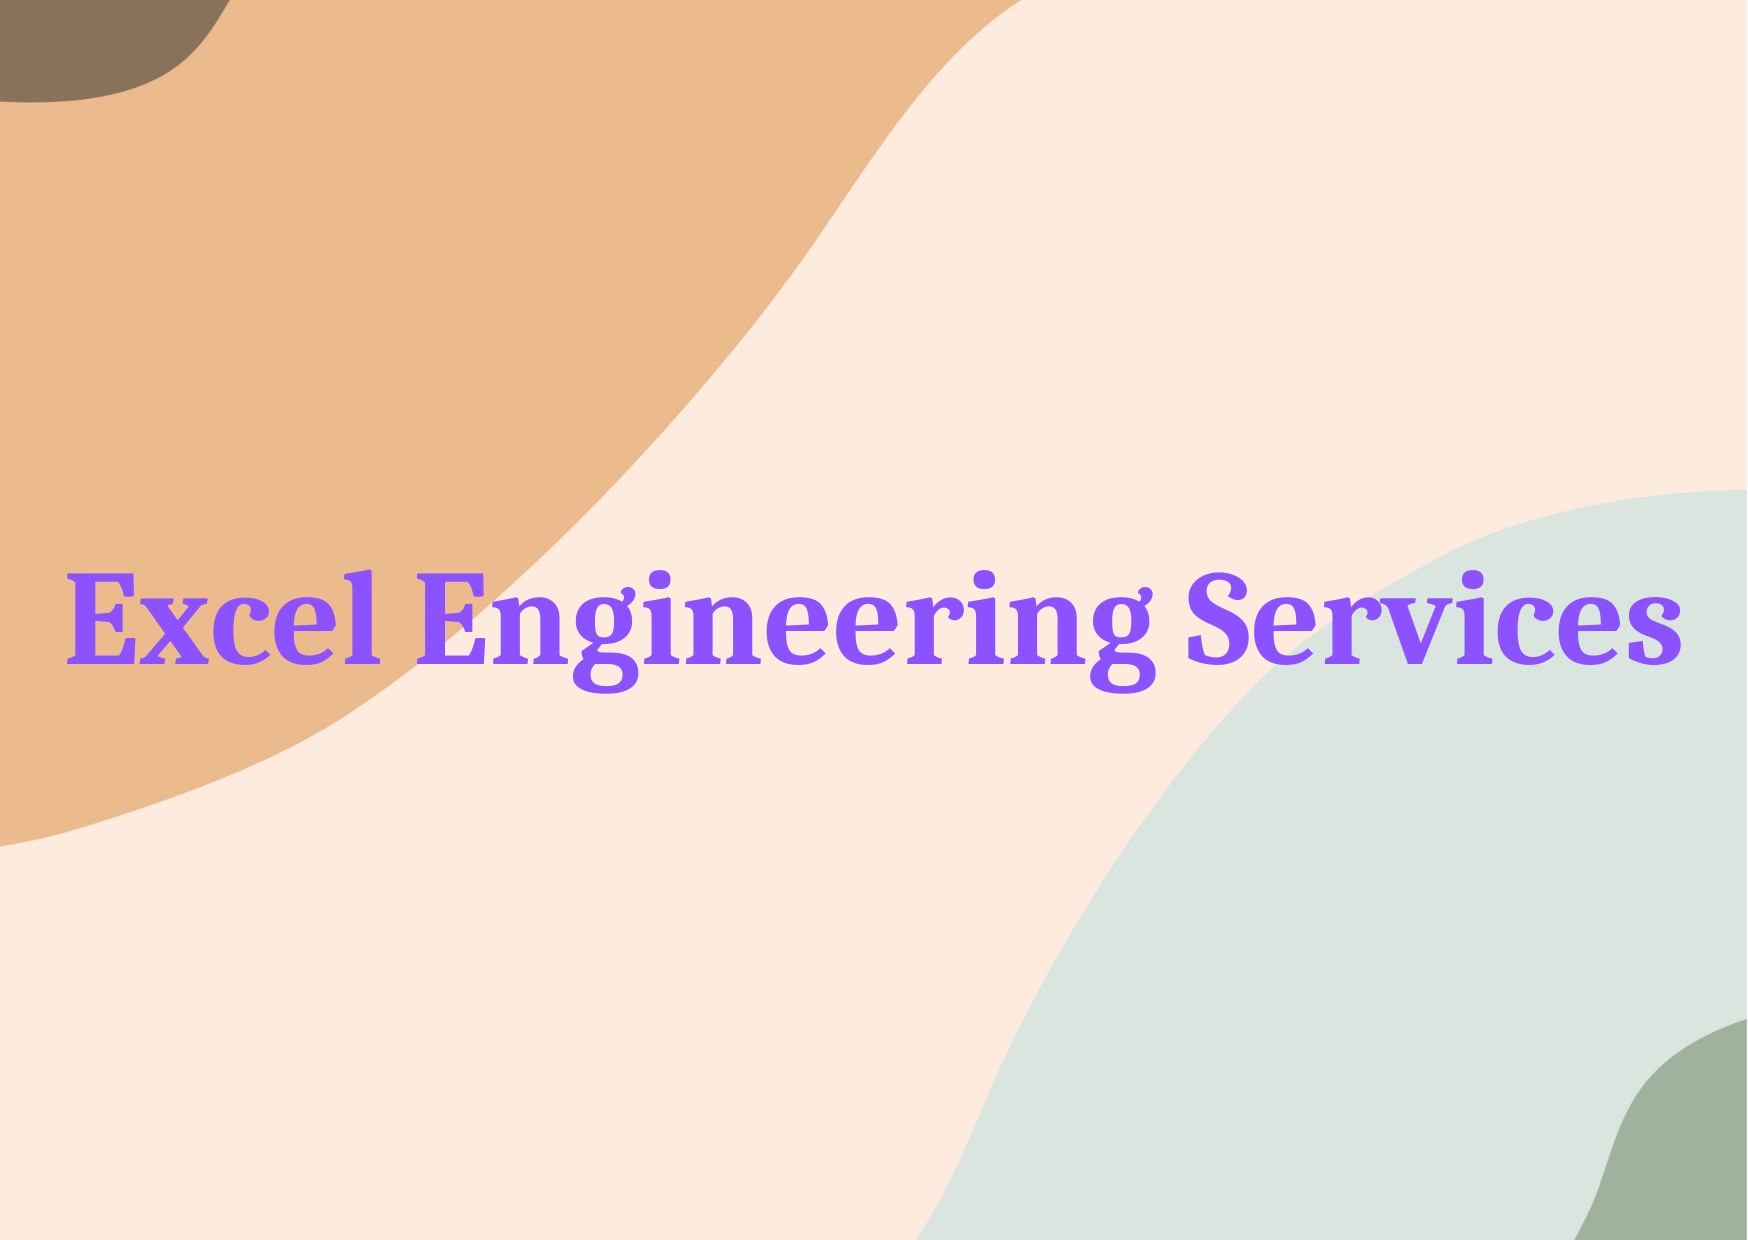 Excel Engineering Services 